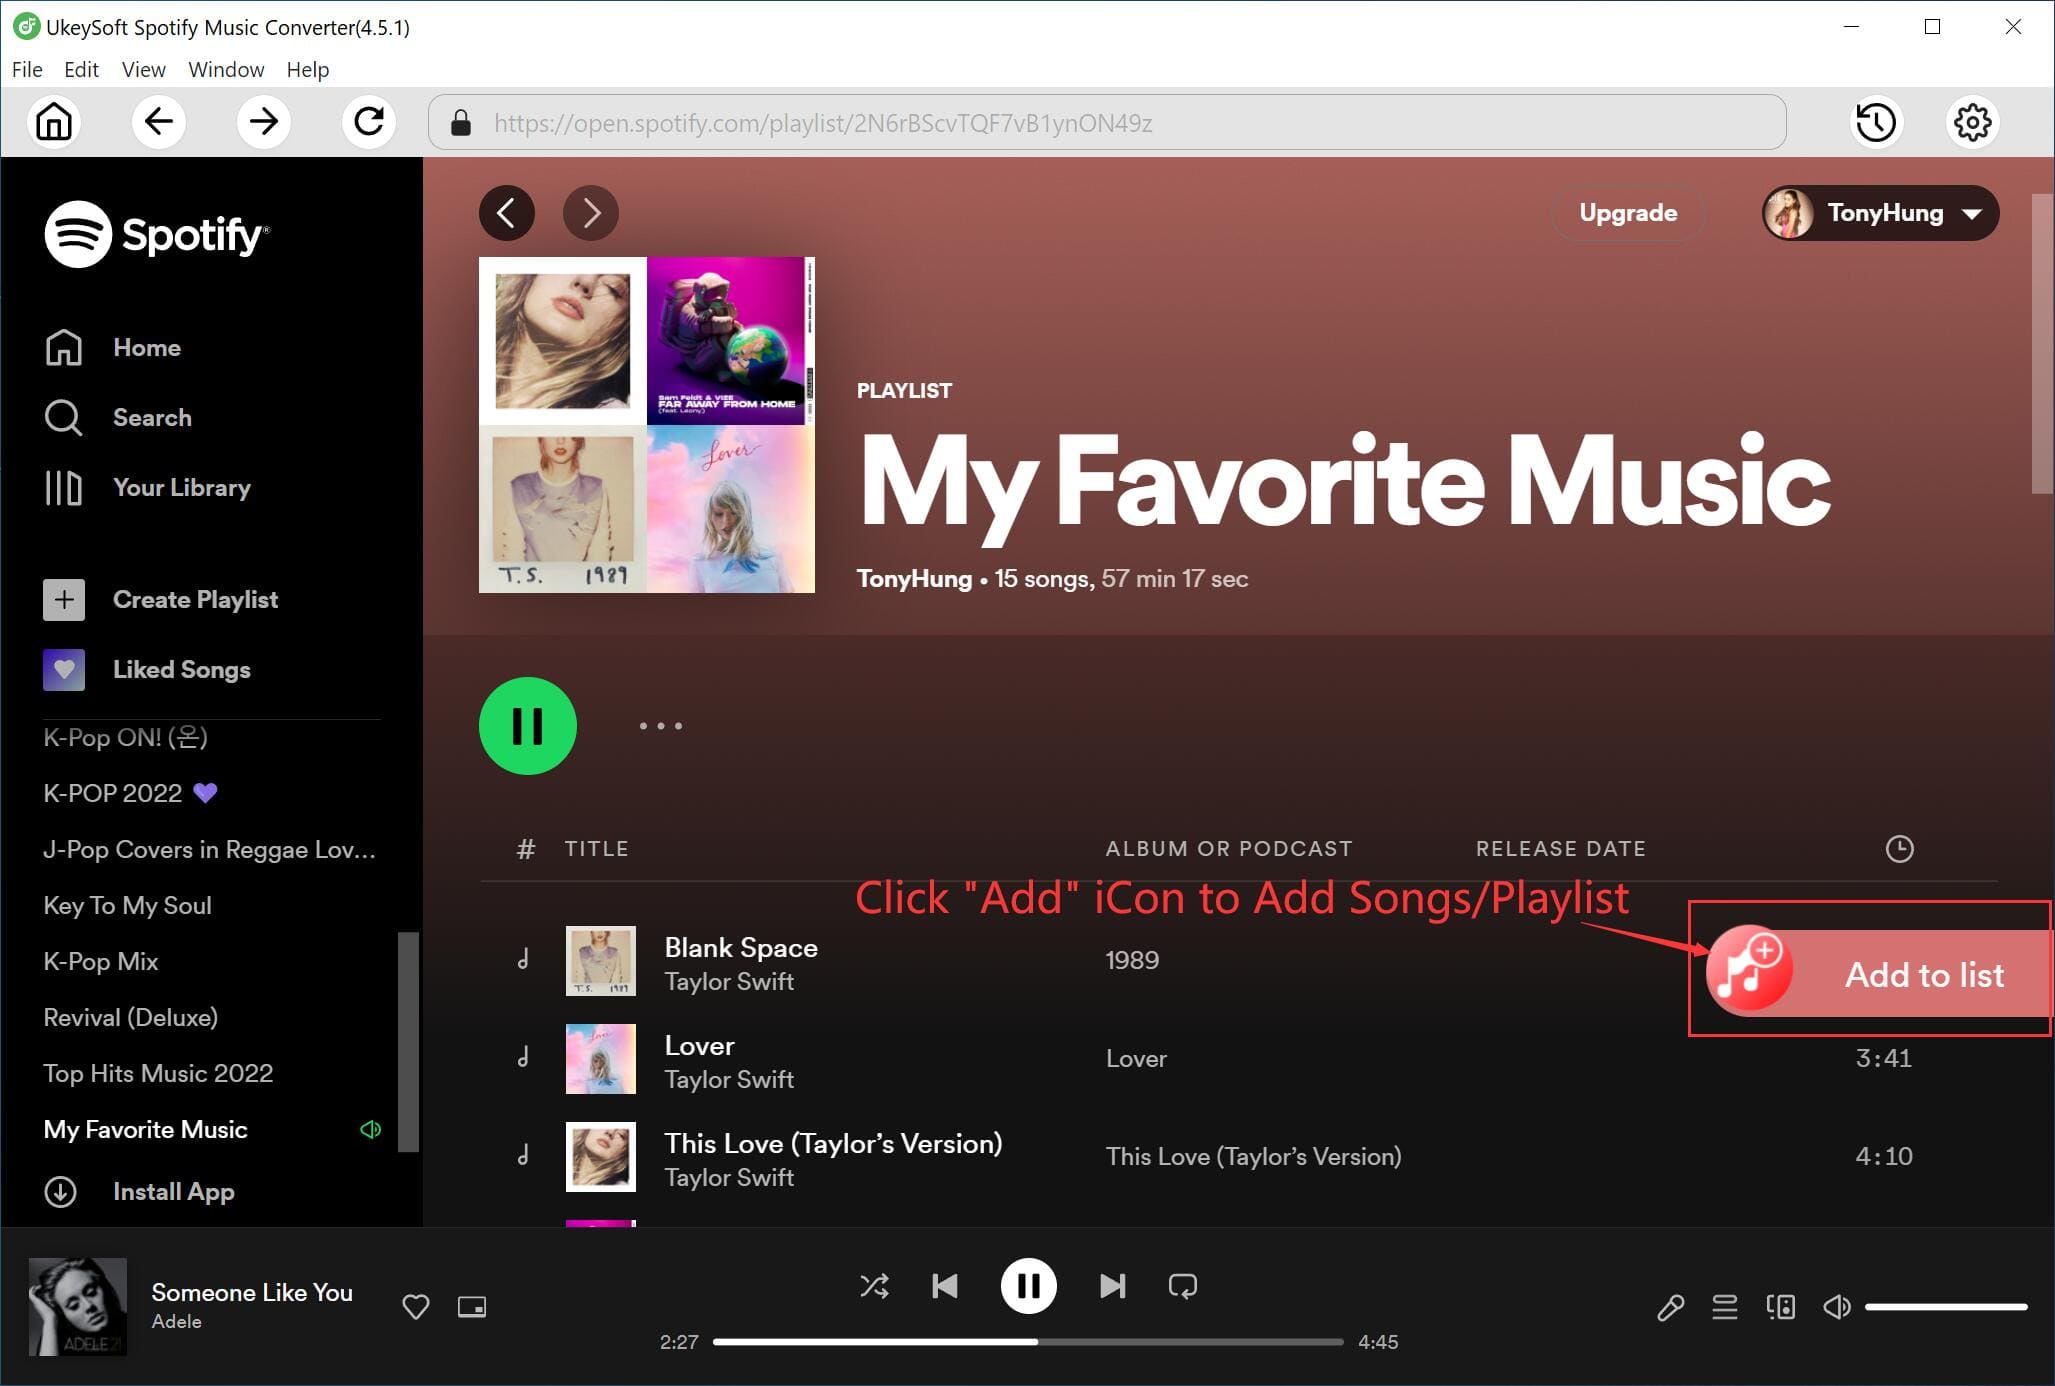 spotify downloaded music to mp3